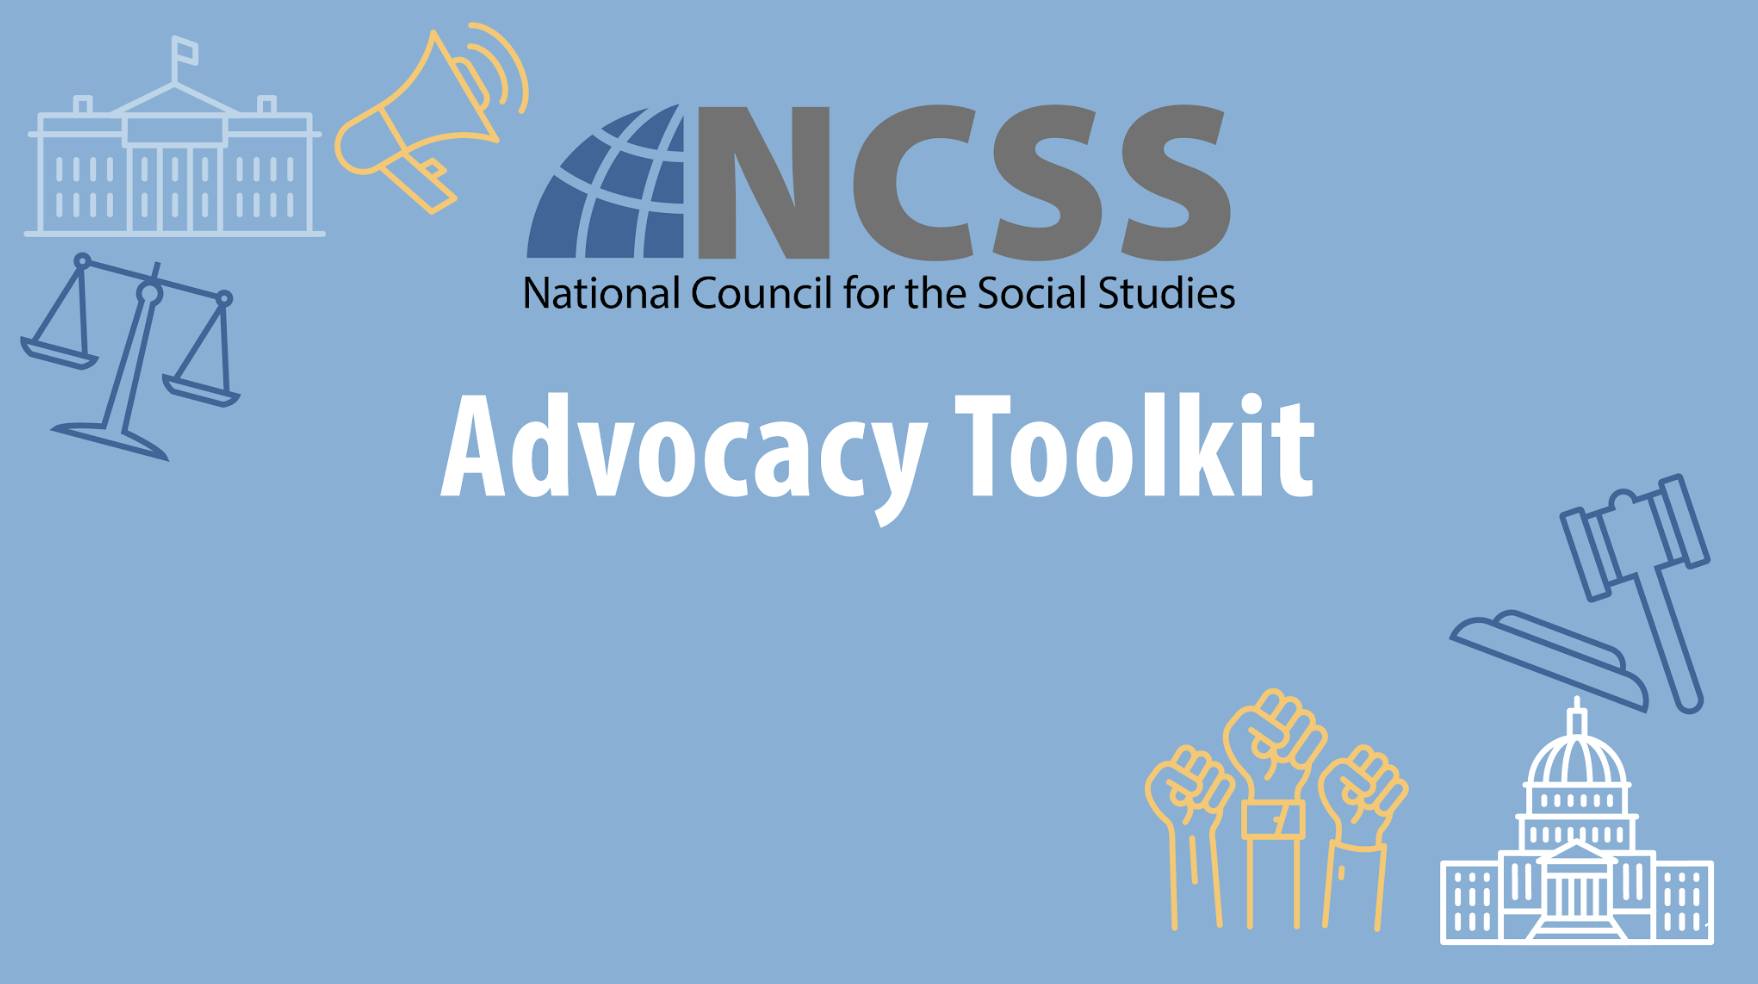 NCSS Advocacy Toolkit